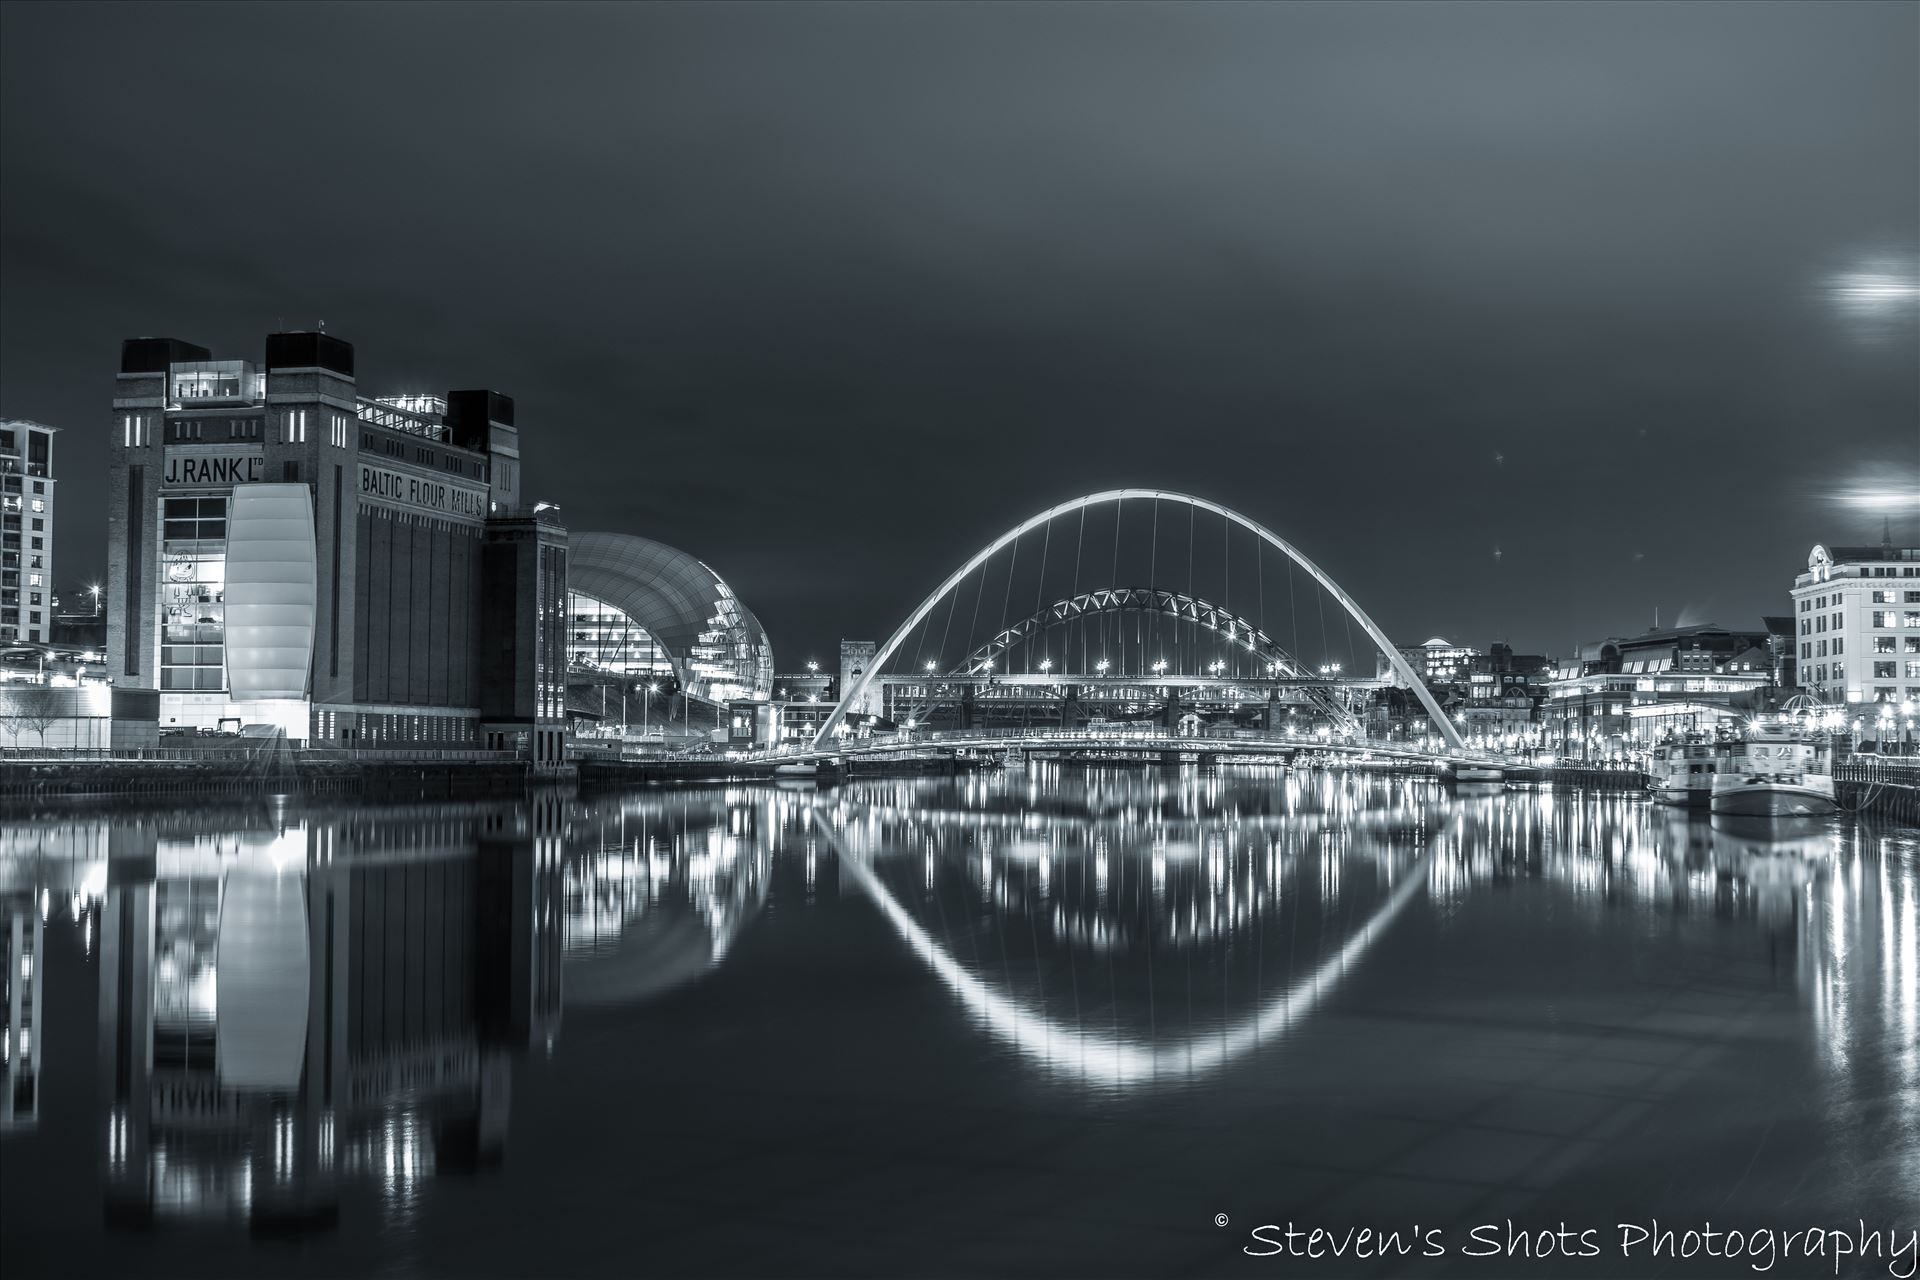 Millennium Bridge and Tyne Bridge - A black and white picture of the Millennium Bridge and Tyne Bridge on Newcastle quayside, the Baltic is visible also. by Steven's Shots Photography